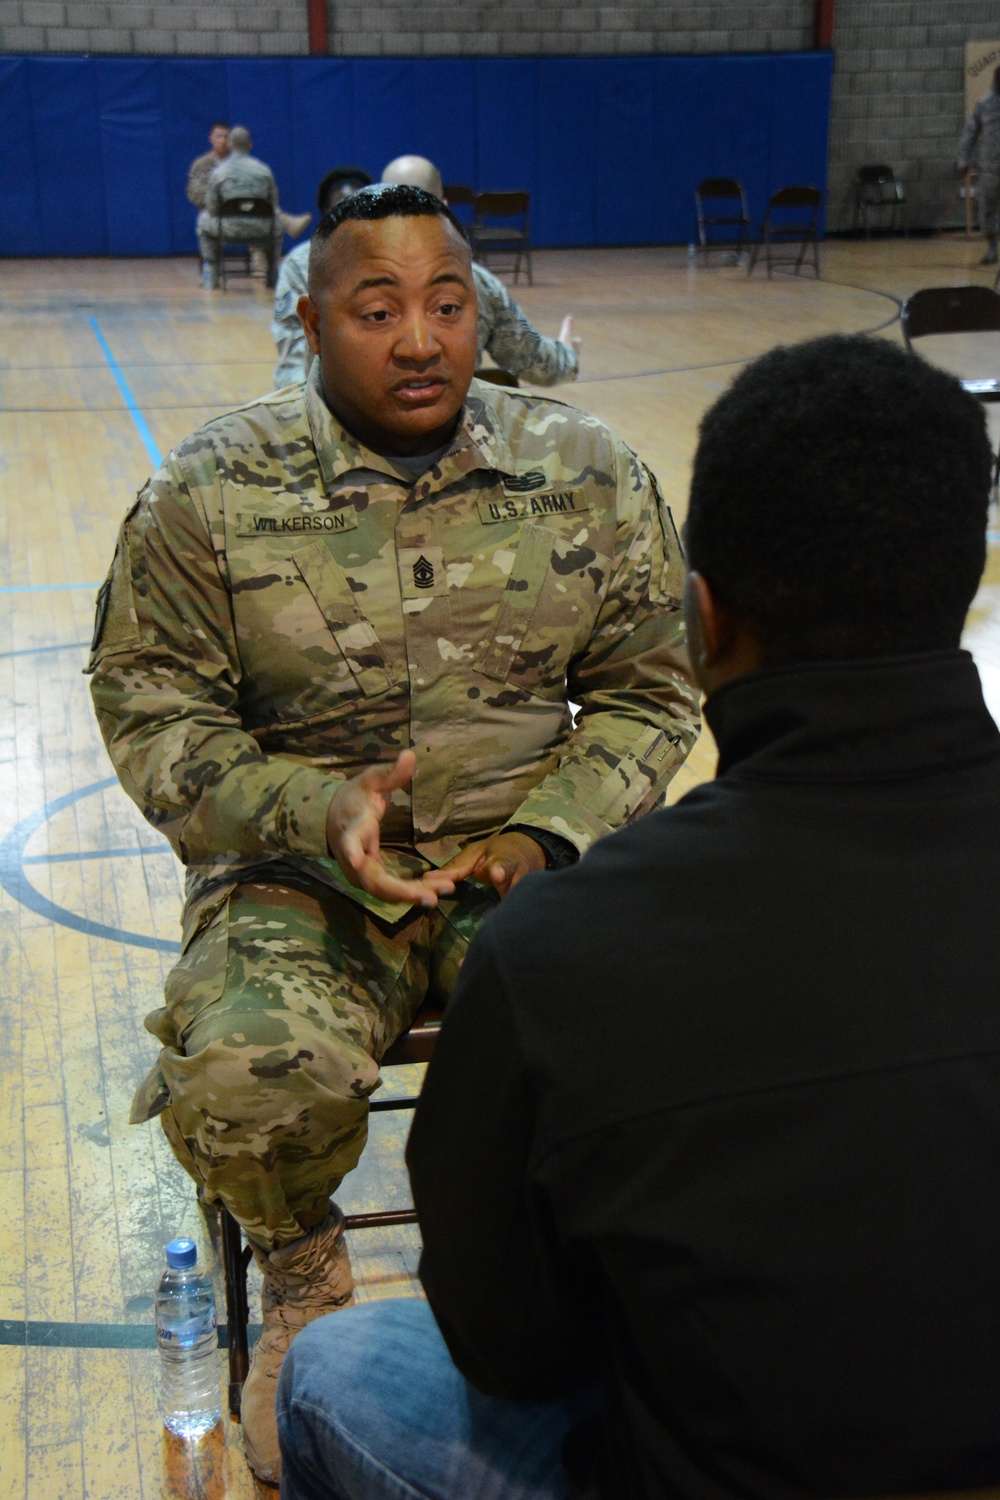 Mentorship: Prepping Airmen for the future